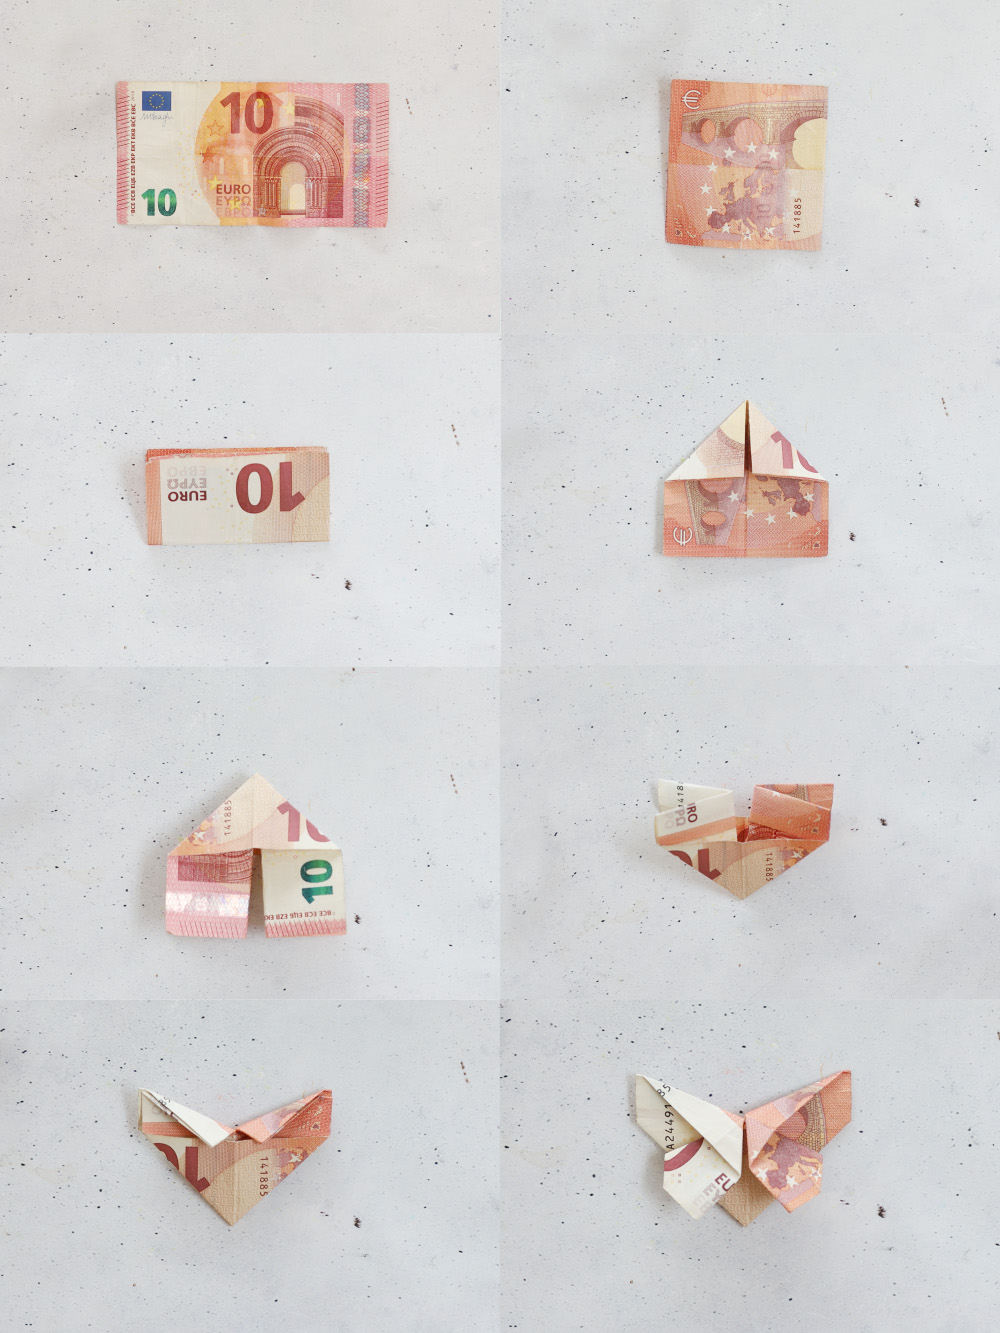 Folding a butterfly out of a banknote